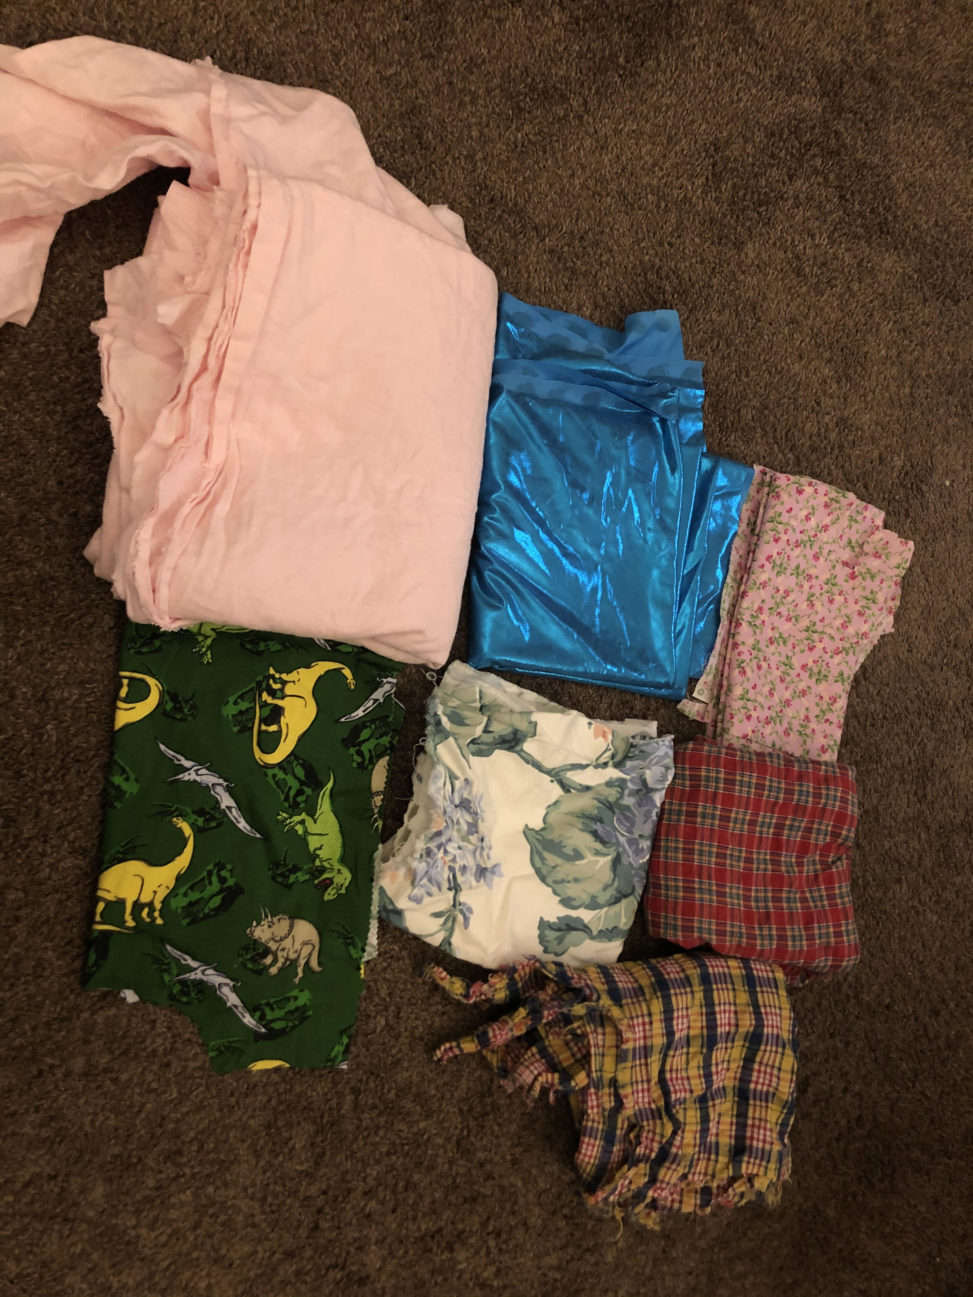 Color photo of 7 folded piles of fabric on a brown carpet- 1 pink flannel, 1 blue ycra, 1 pink flower-printed, 1 red plaid, 1 yellow and blue plaid, 1 white floral, and 1 green with yellow dinosaurs